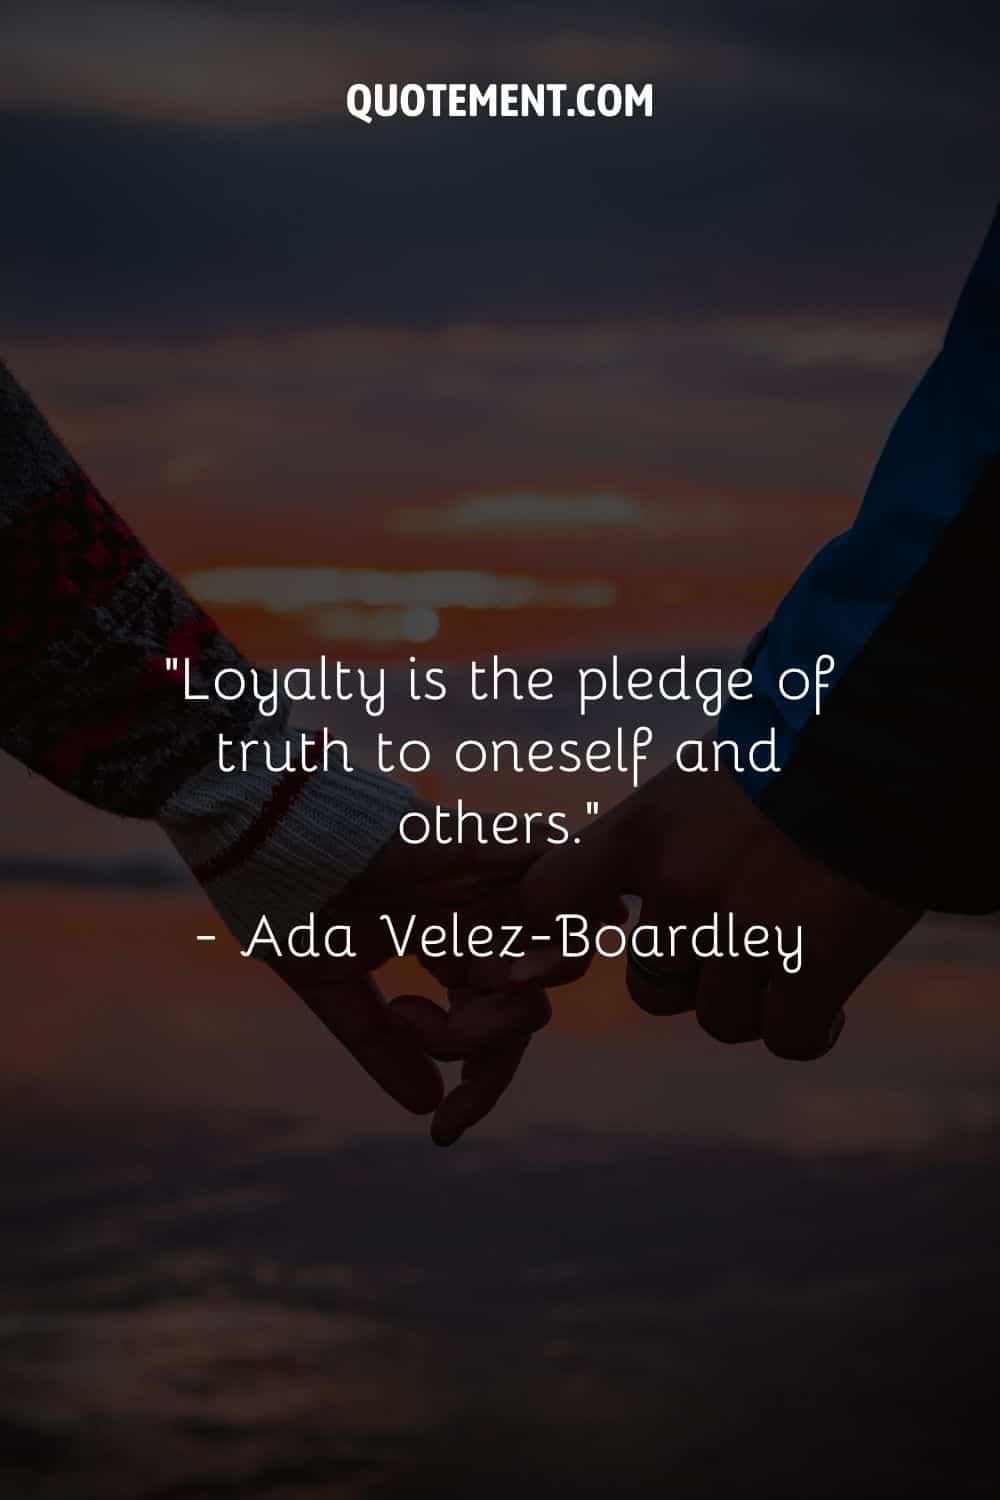 “Loyalty is the pledge of truth to oneself and others.” ― Ada Velez-Boardley